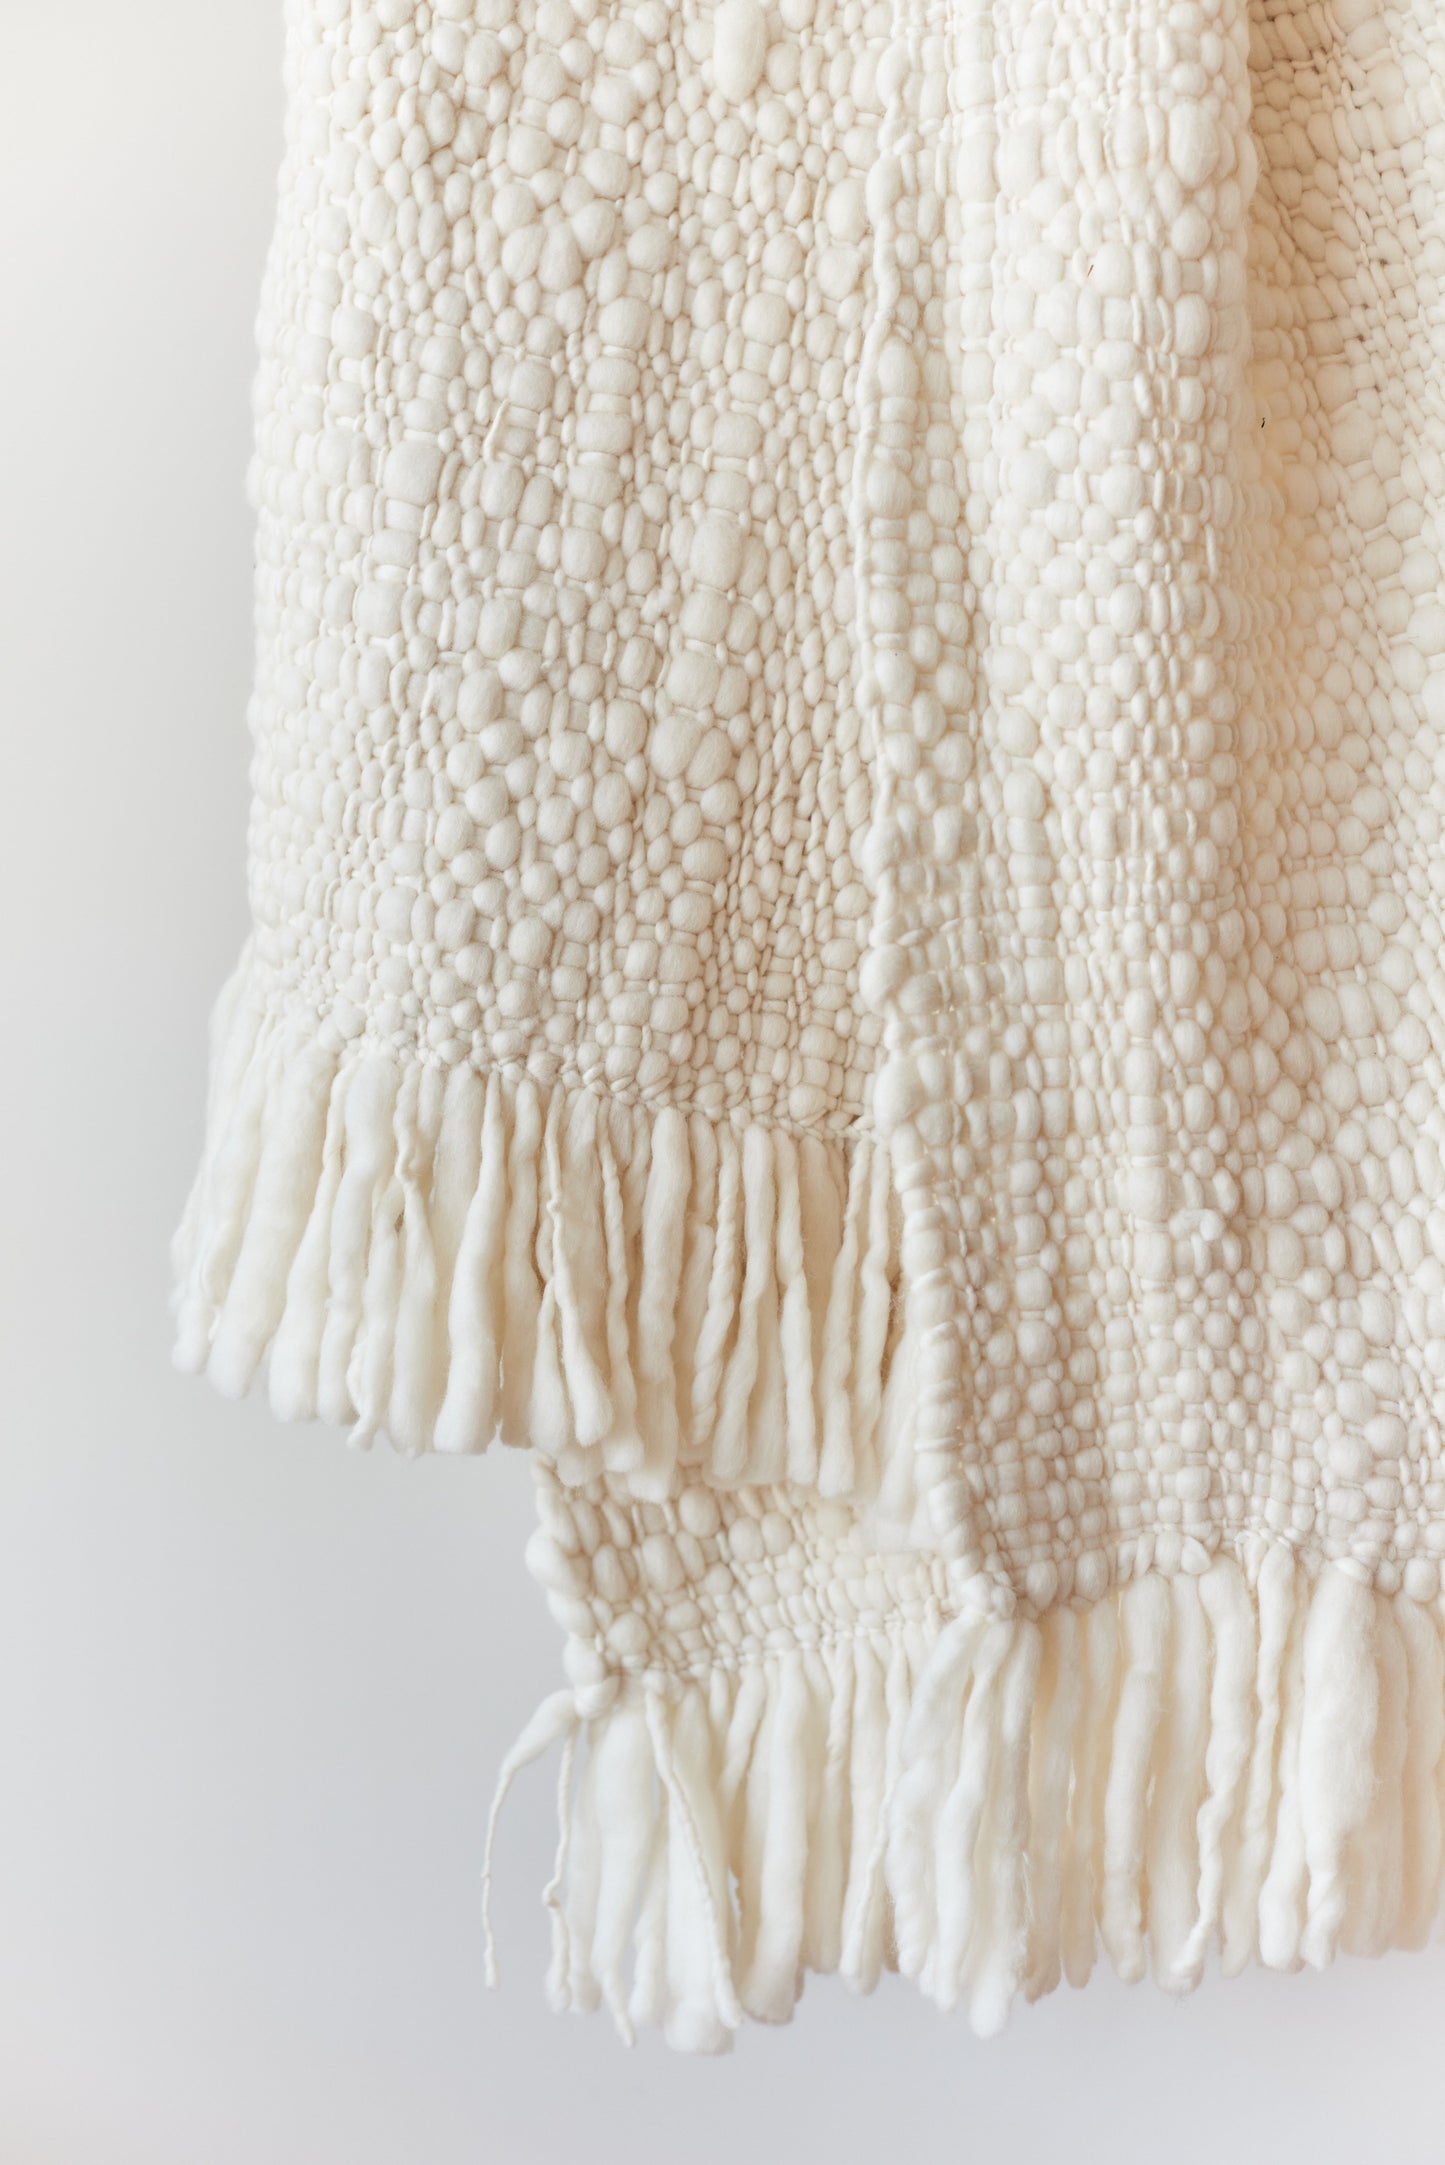 Chunky Blanket - Experience Natural Luxury and Unmatched Comfort with Handwoven Uruguayan Merino Wool